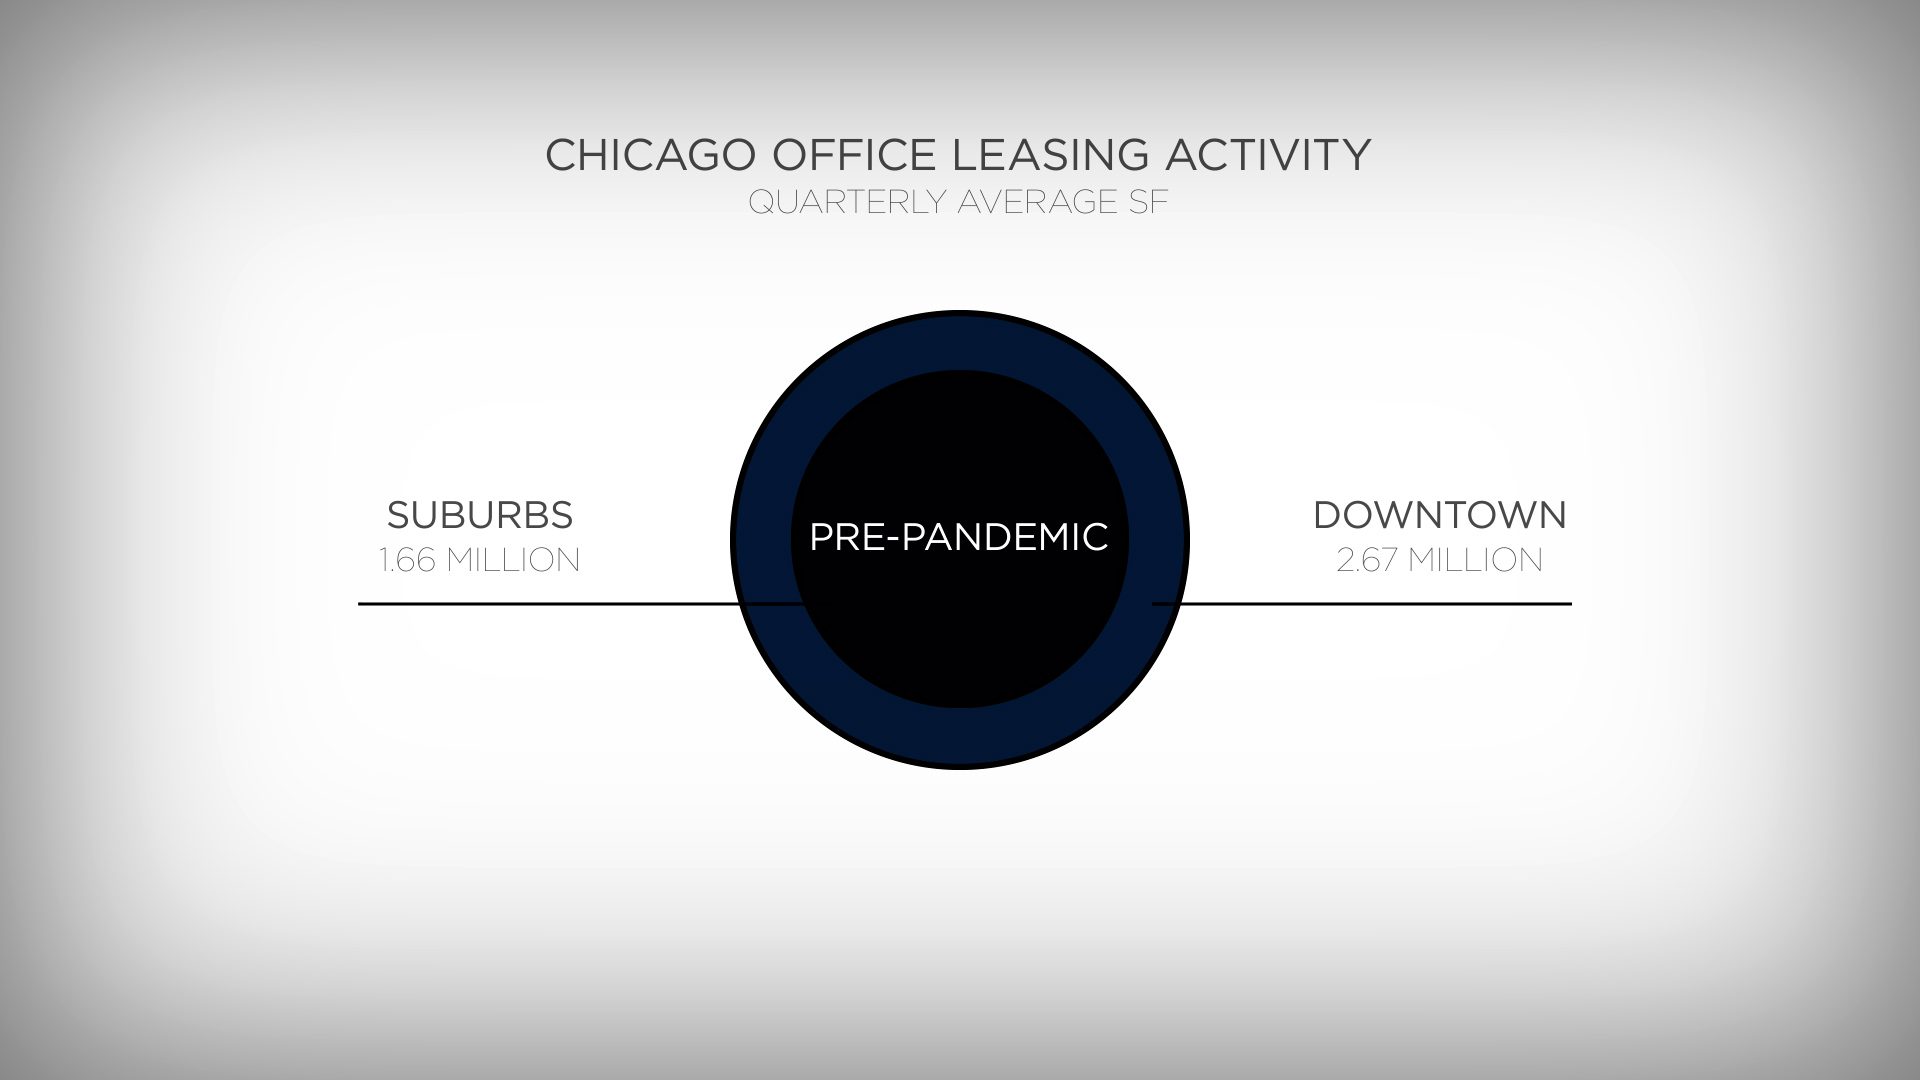 REmark – Chicago Office Leasing Activity, Pre- and Post-Pandemic: Downtown vs Suburban Markets